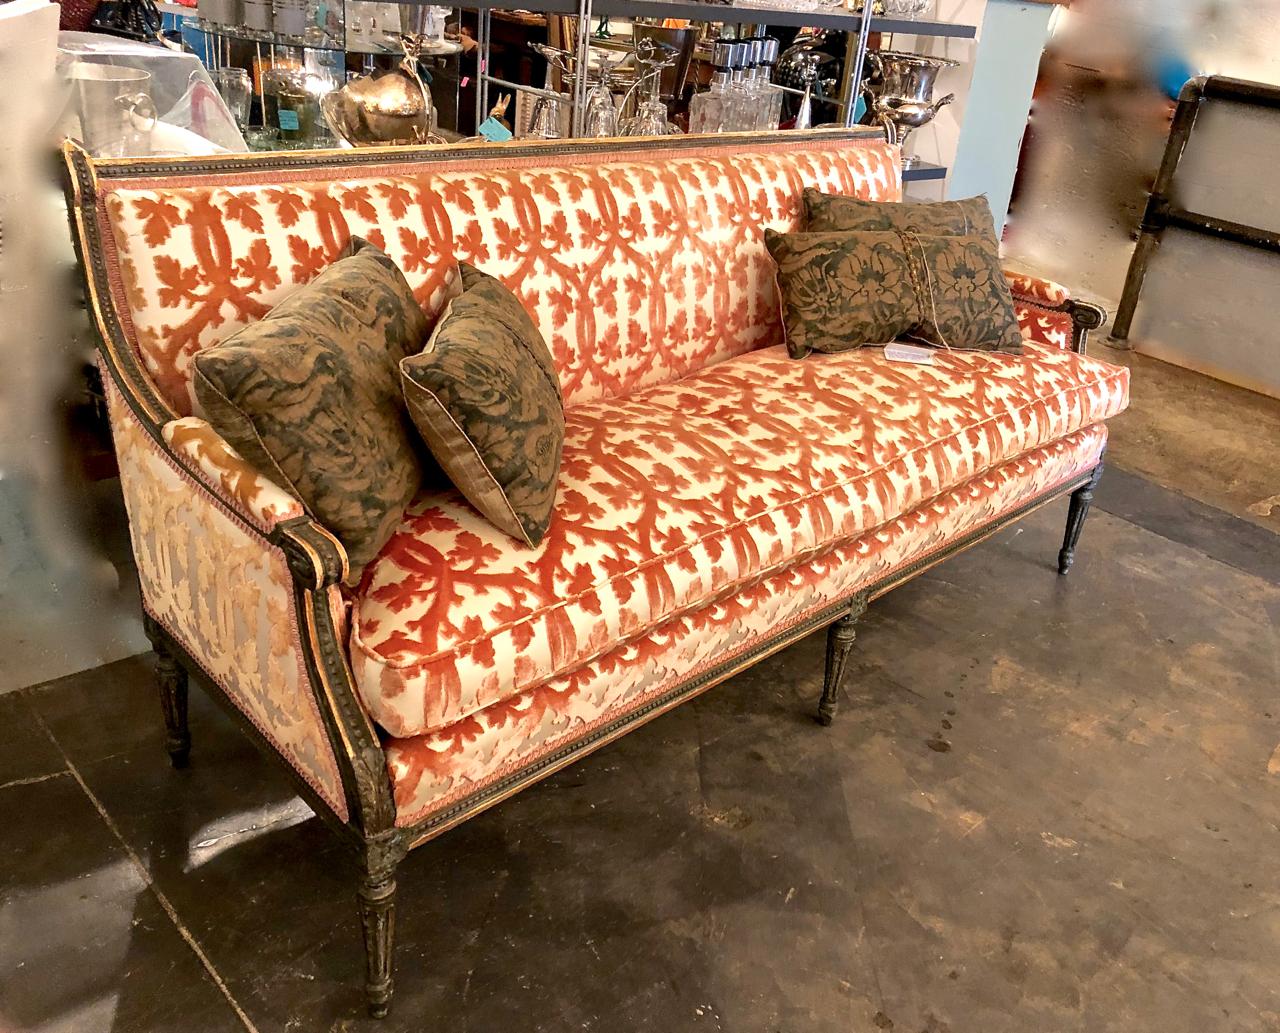 This is an outstanding example of a Gustavian Sofa that dates to c. 1810-1820. The sofa is in very good to excellent condition, considering it's 200 plus years of use. The sofa is upholstered in a rich Italian silk cut velvet.  